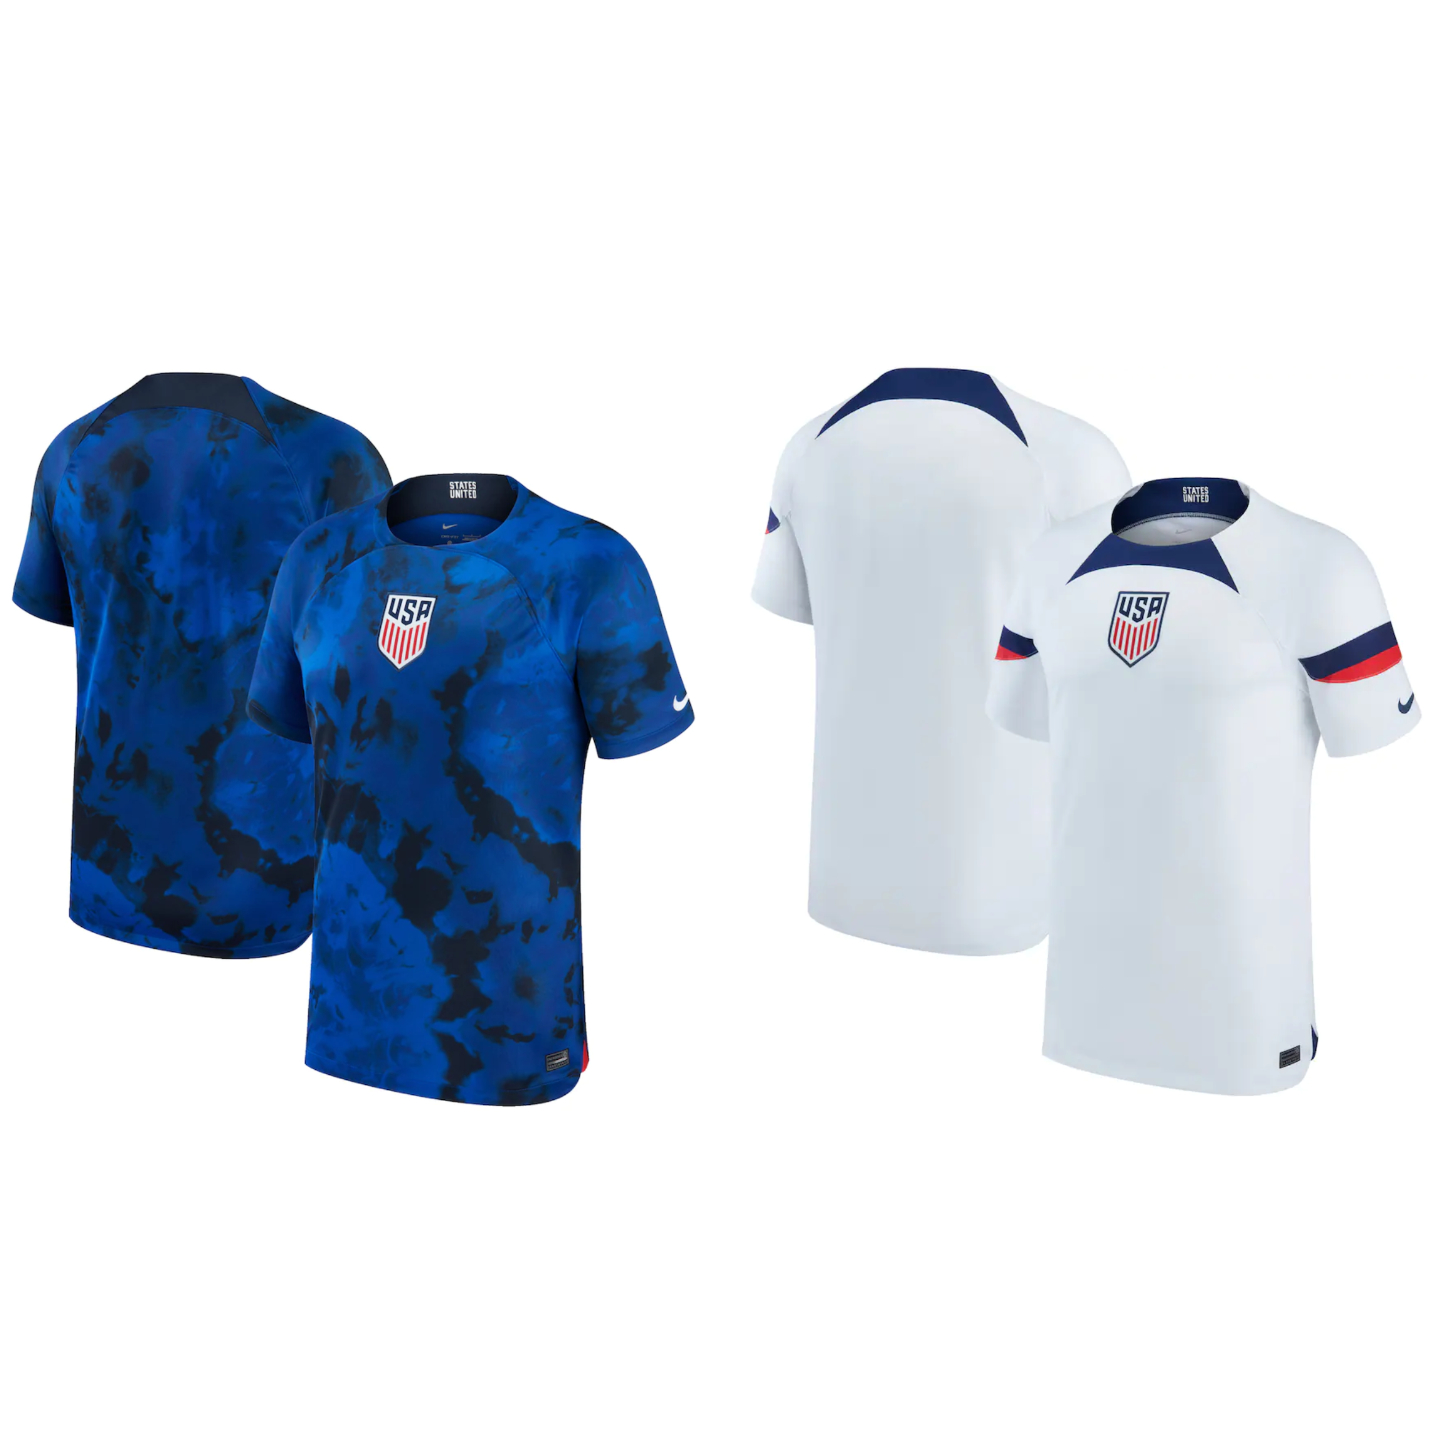 World Cup 2022: US gear now available at Fanatics for men, women, youth 